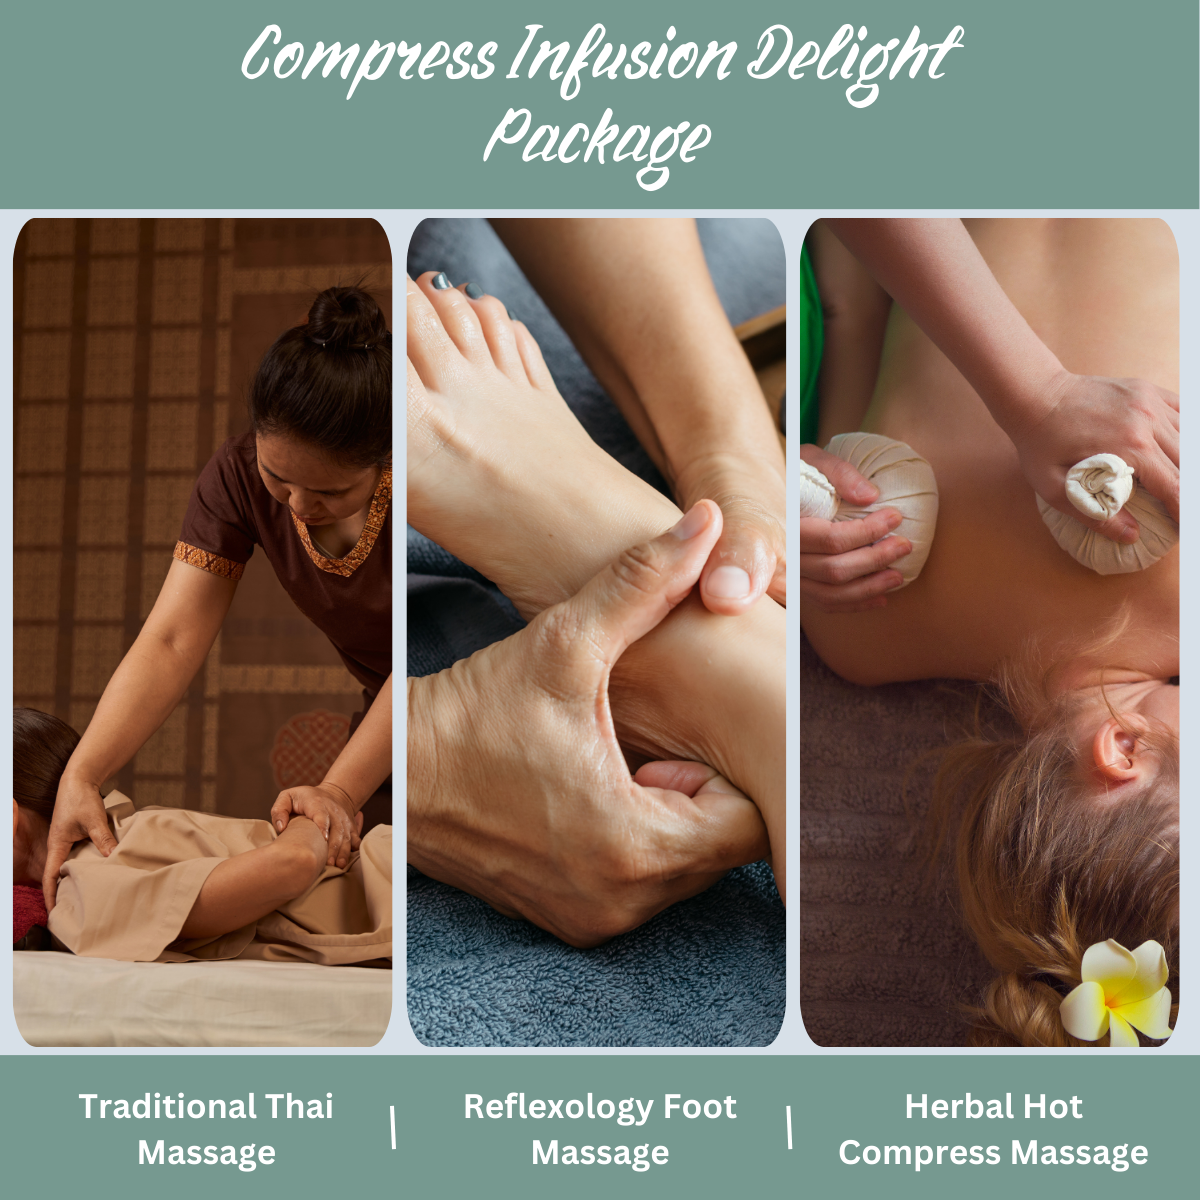 Compress Infusion Delight Package